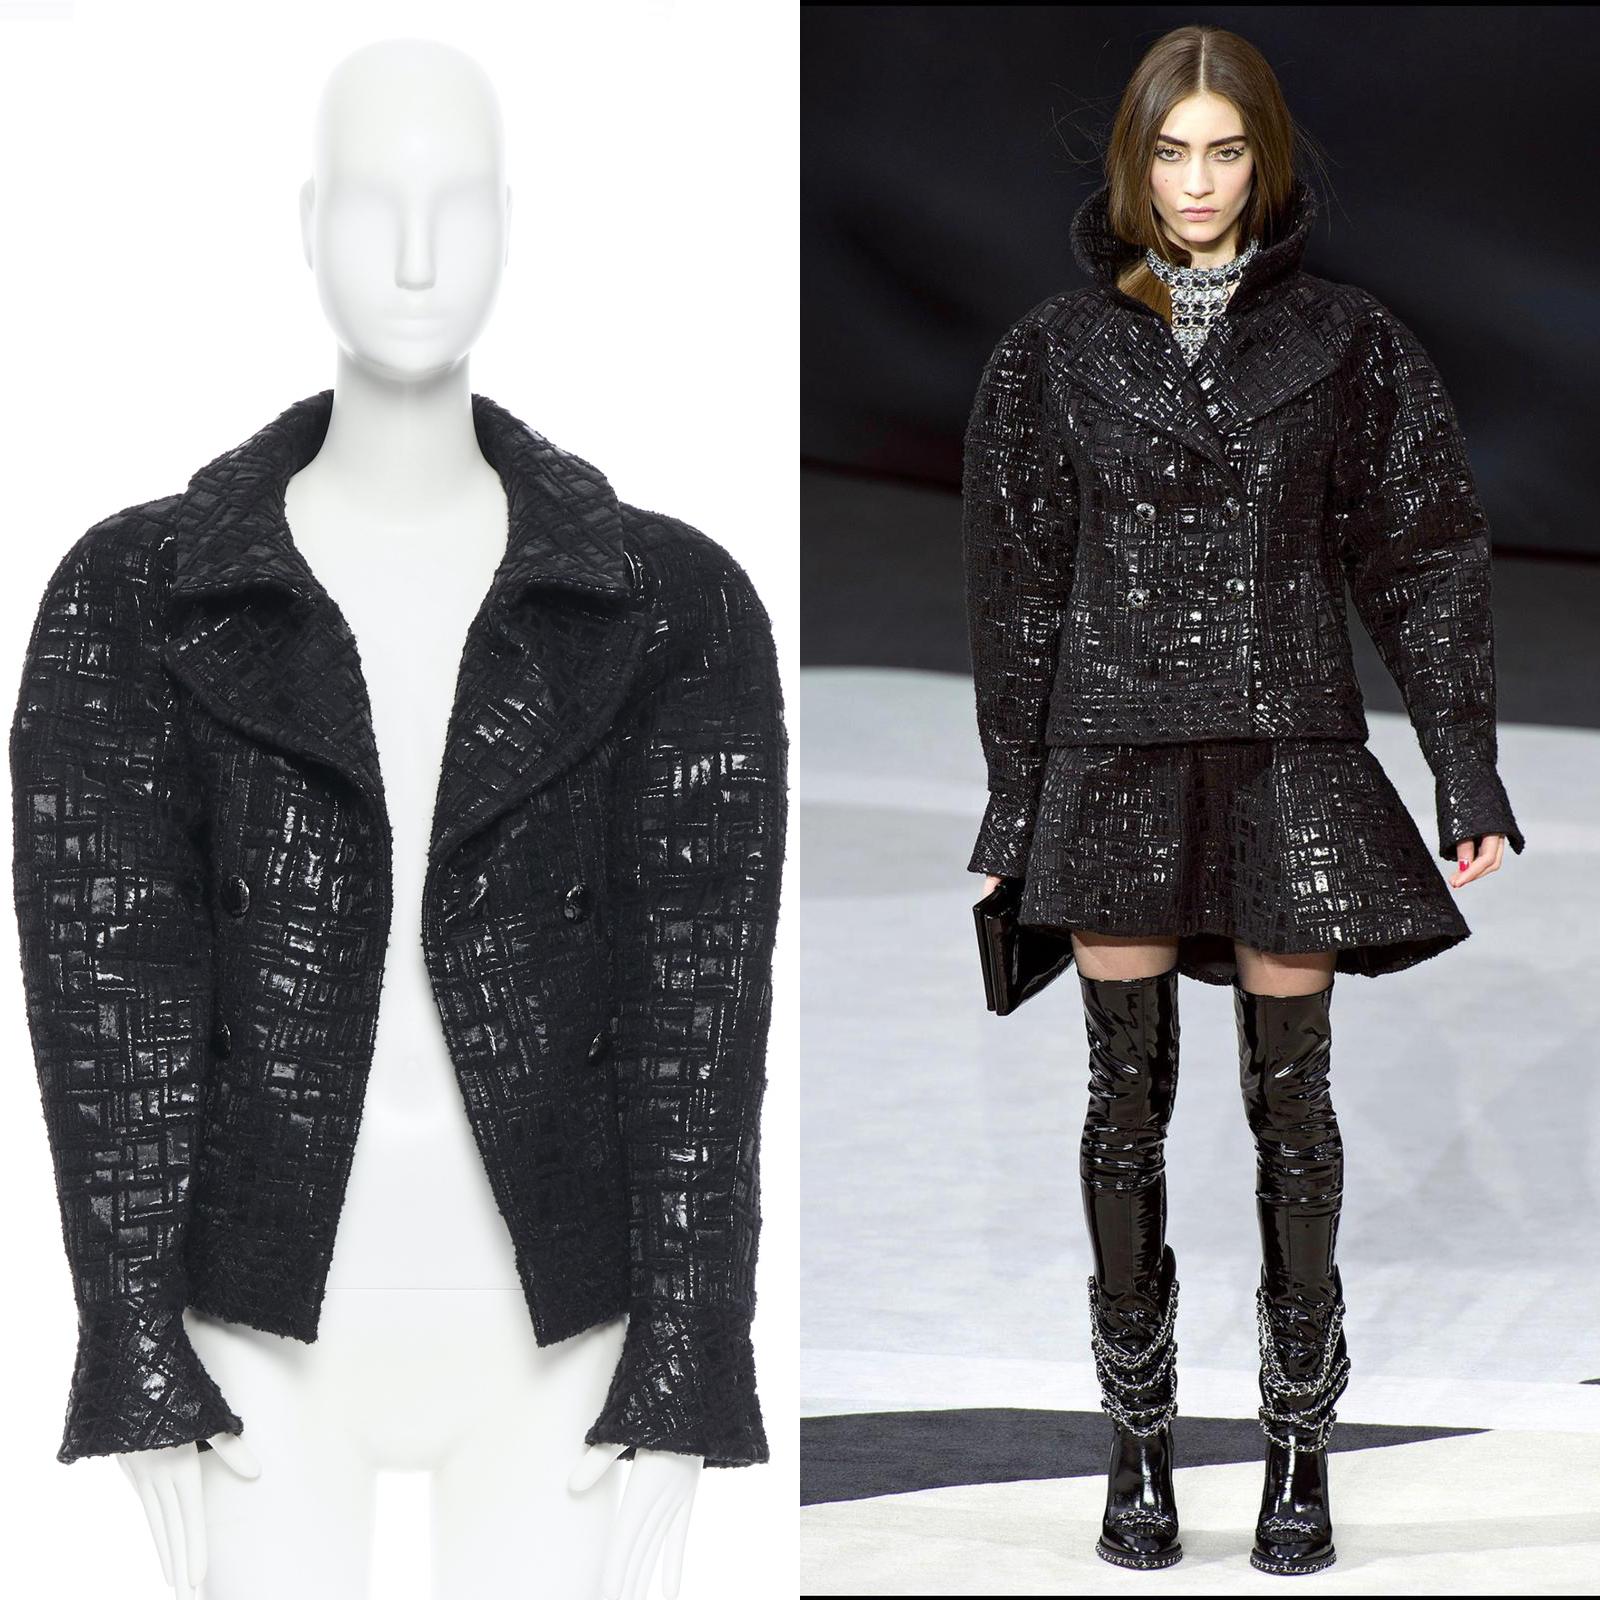 runway CHANEL 13A cyber tweed bomber sleeve double breasted black jacket FR36
Brand: Chanel
Designer: Karl Lagerfeld
Collection: 13A Runway
Material: Tweed
Color: Black
Pattern: Geometric
Closure: Button
Extra Detail: Acrylic, nylon, wool,